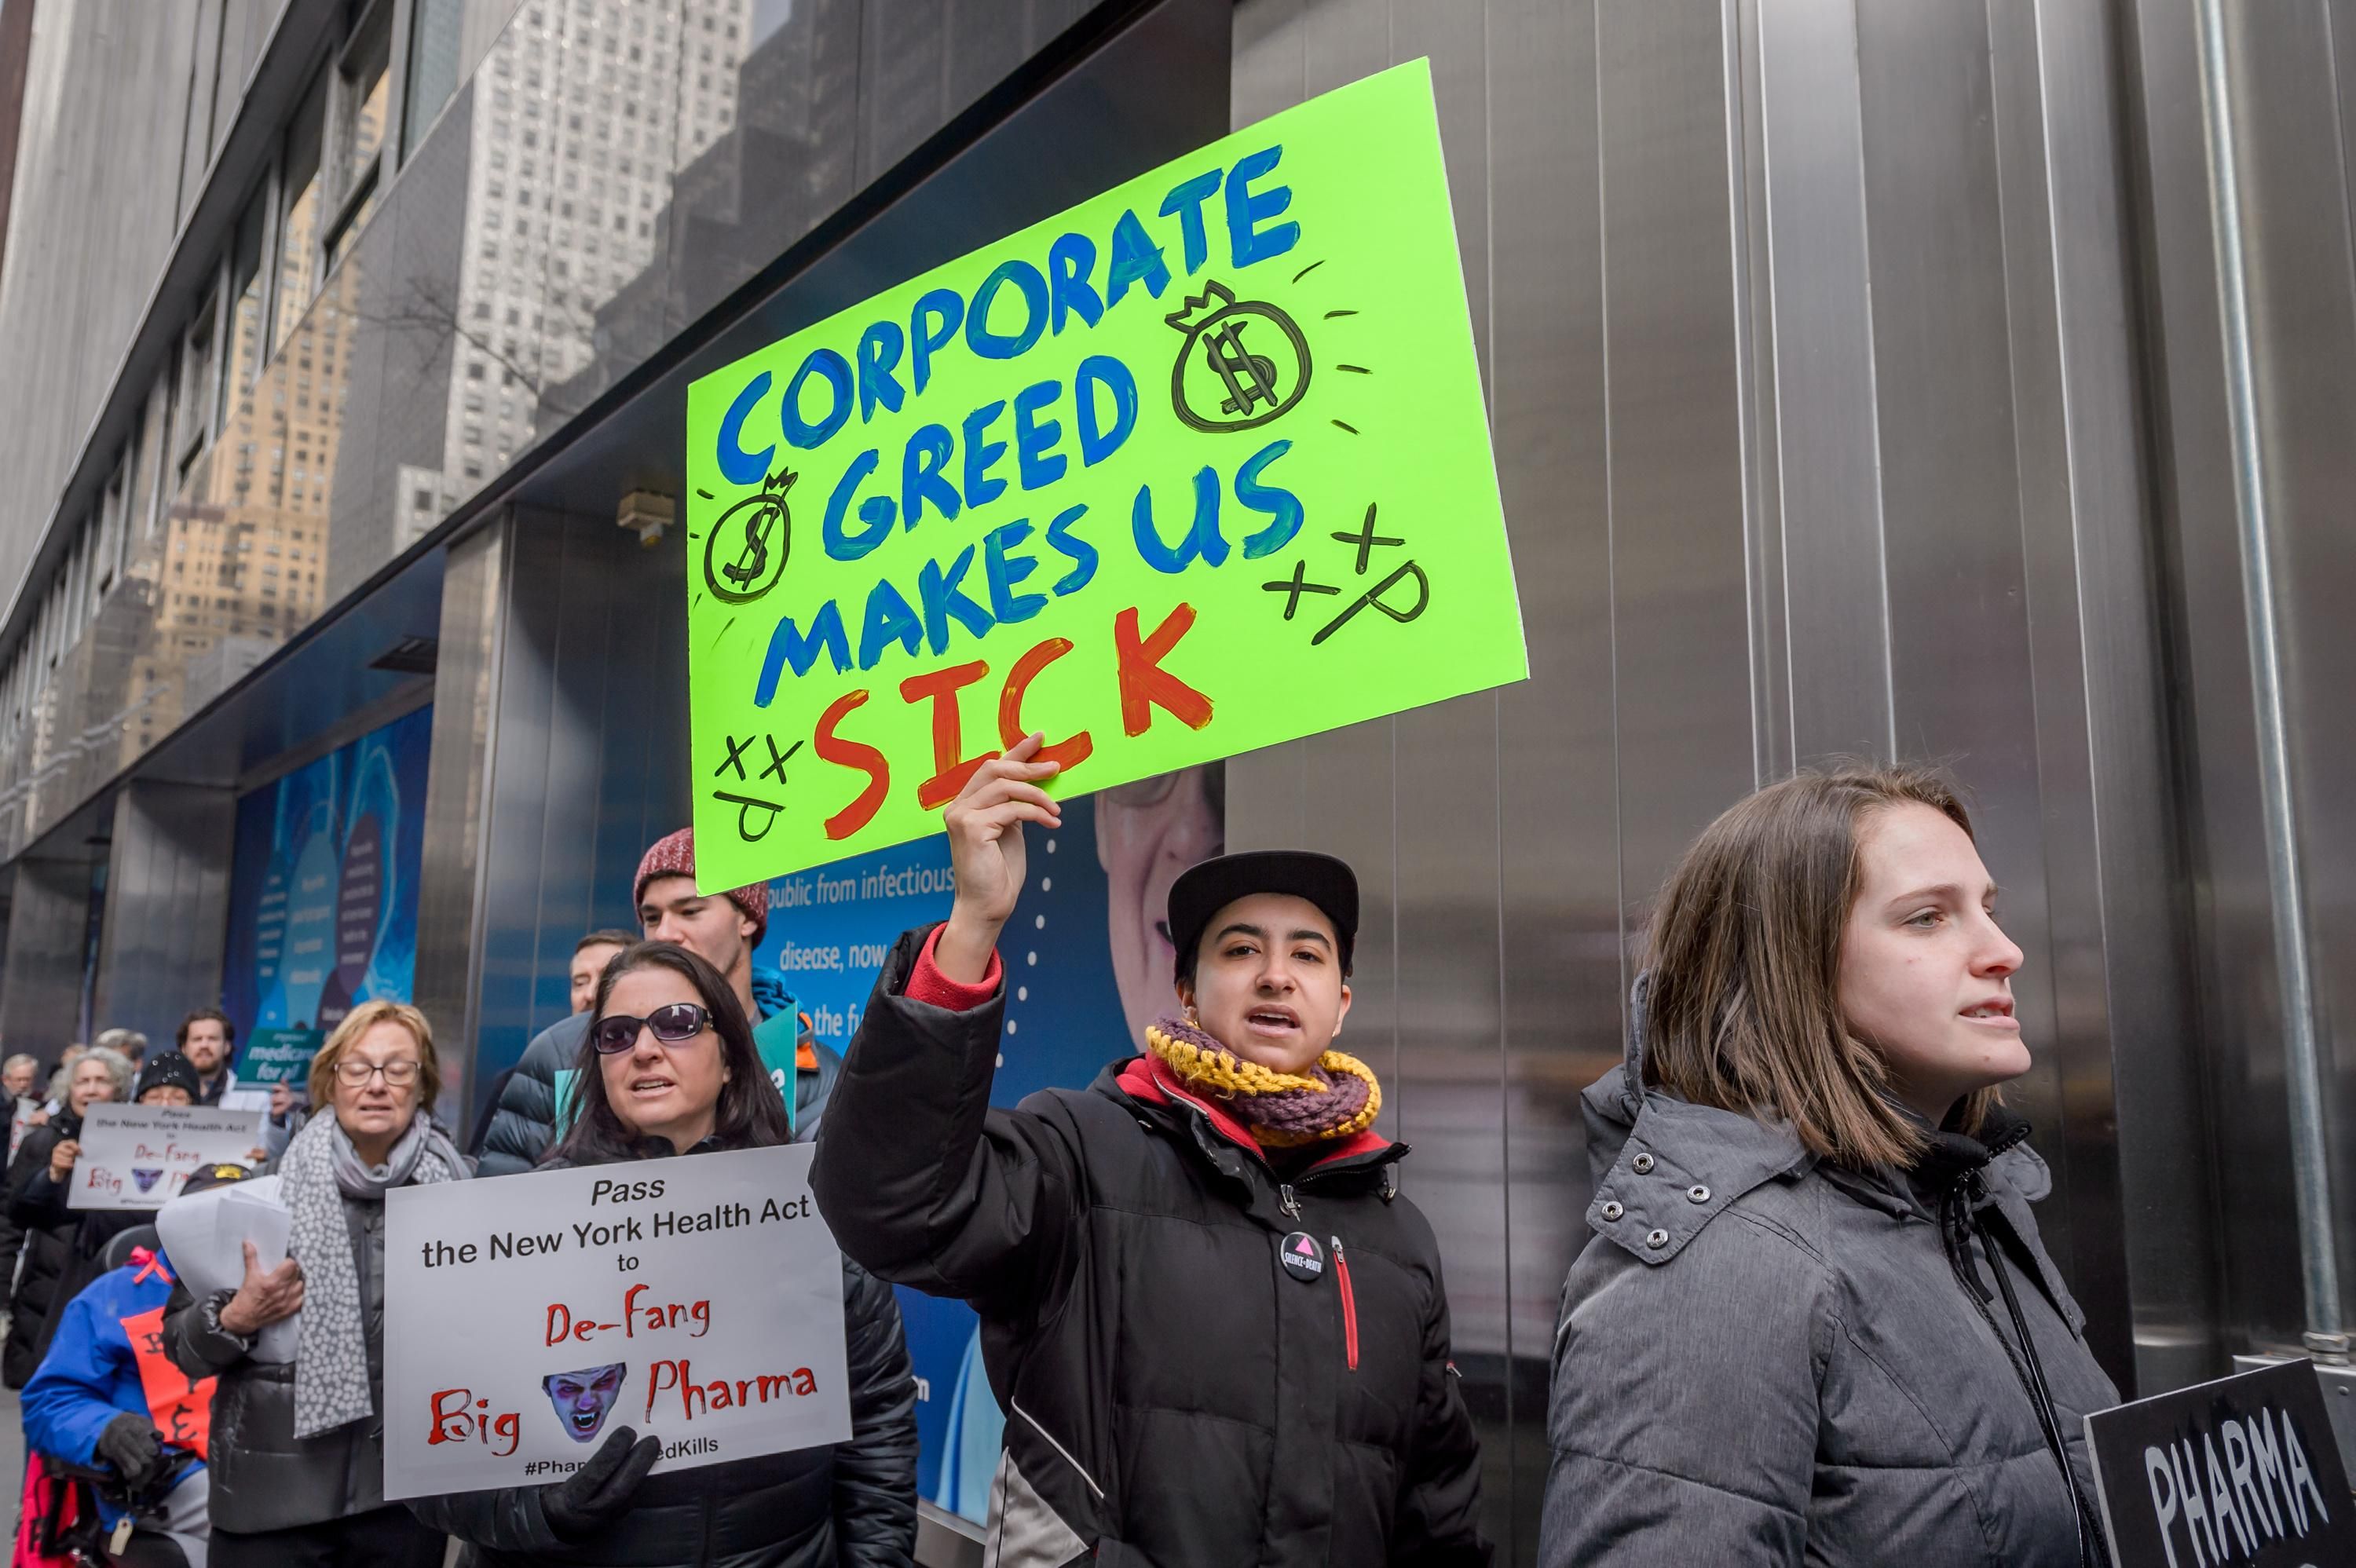 Medical professionals, medical students, ACT UP New York, and their supporters protested outside Pfizer's headquarters in New York City on March 3, 2019. (Photo: Erik McGregor/LightRocket via Getty Images)